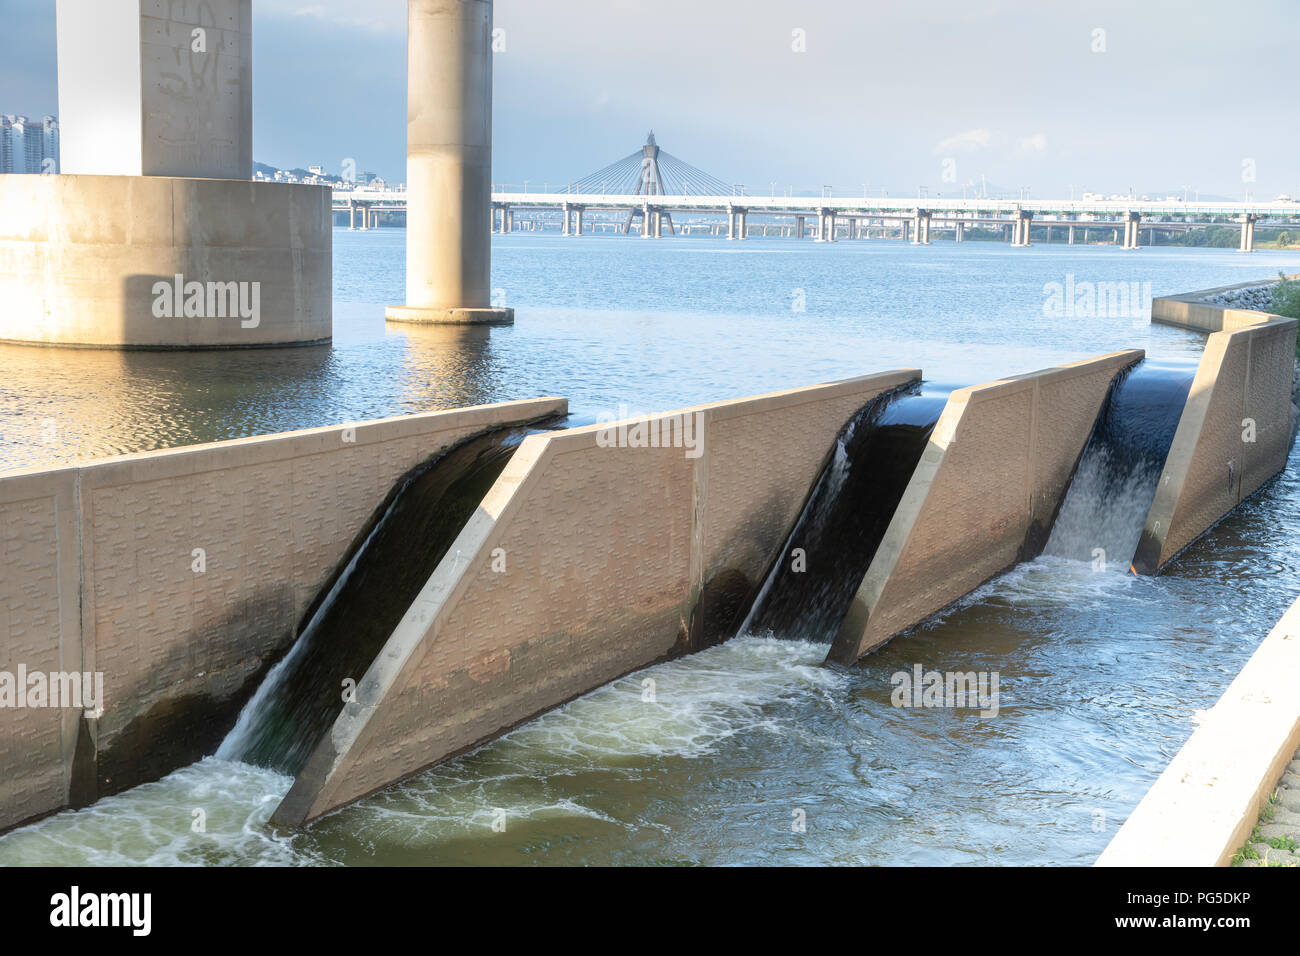 Small structures separate Han river into several streams under the Jamsil, bridge, Seoul, Korea Stock Photo